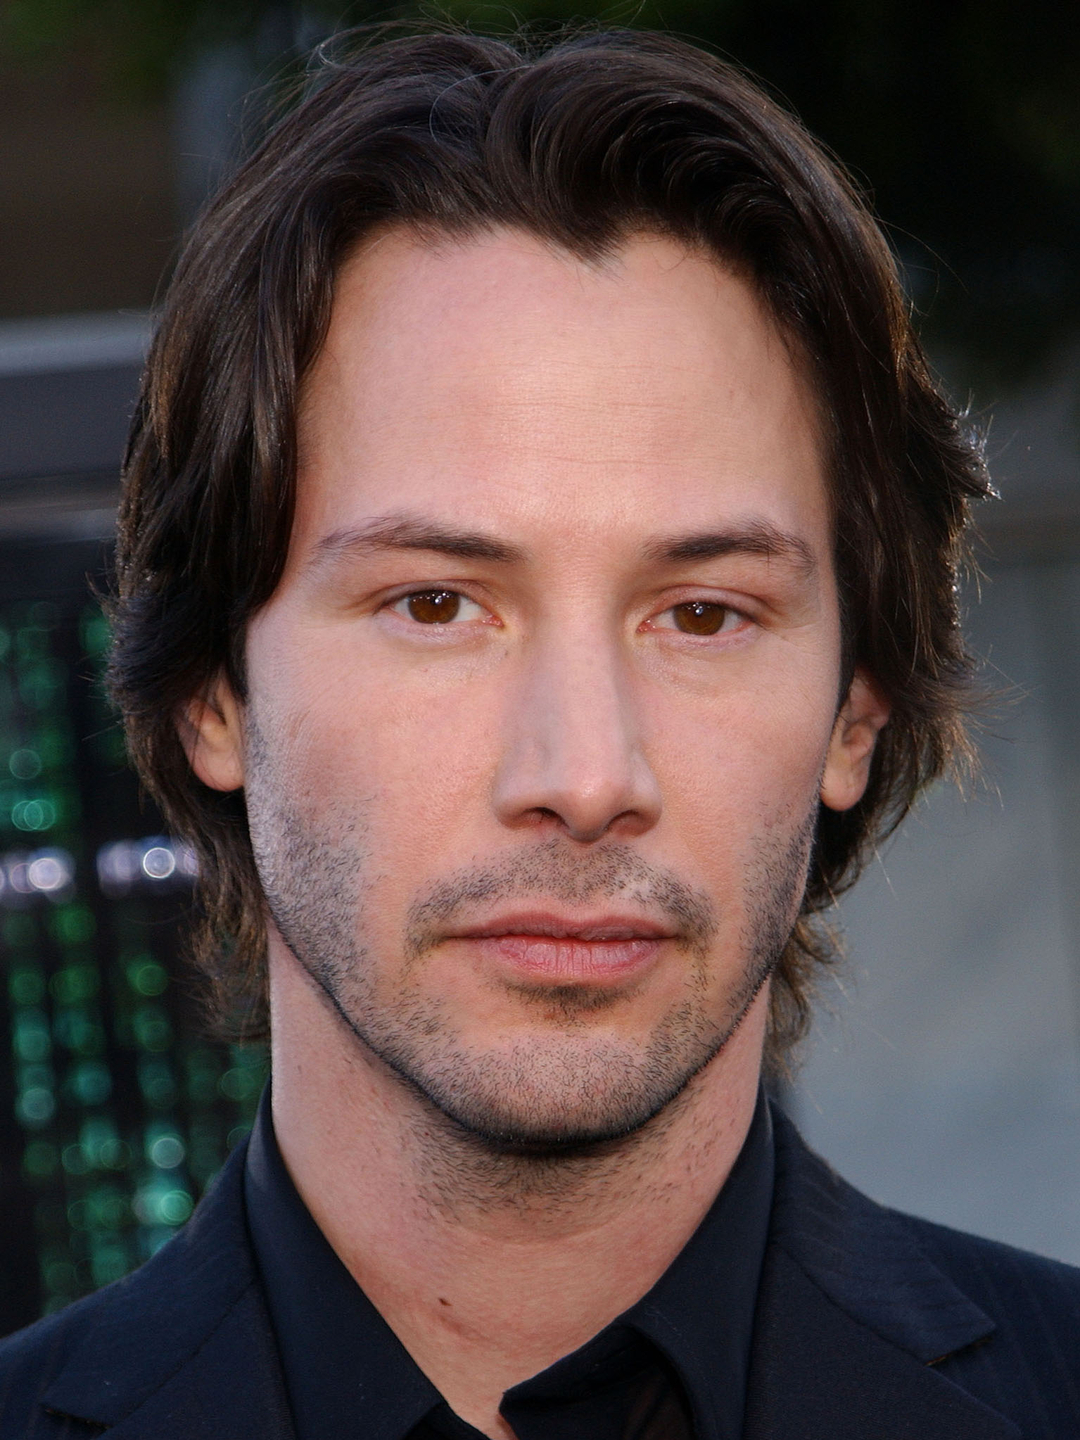 Keanu Reeves who is his father